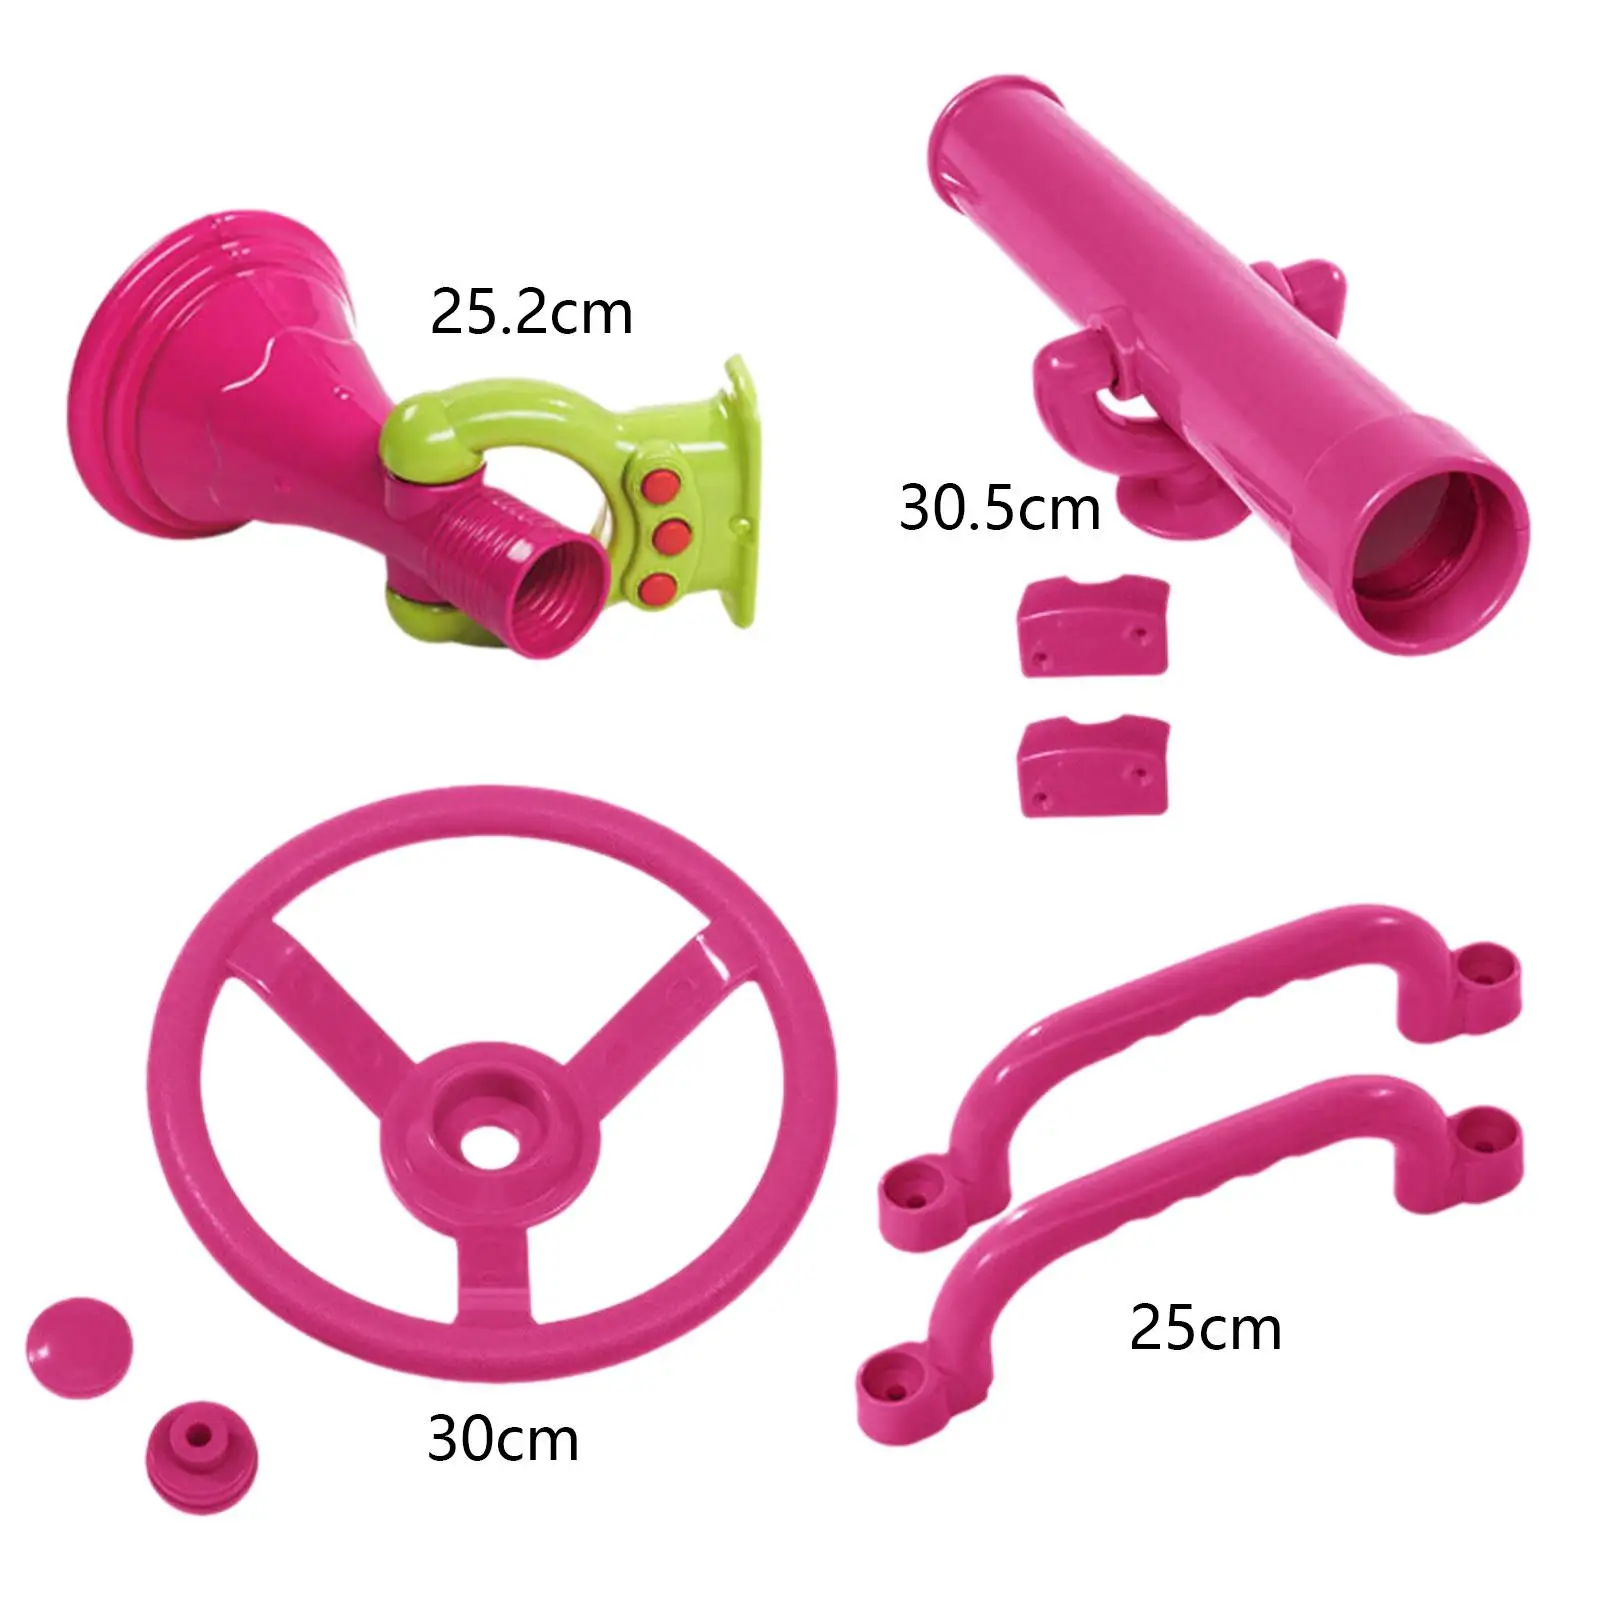 4Pcs Playground Accessories Pink Playset Parts Pirate Ship Wheel for Kids for Swingset Outdoor Playhouse Backyard Ages 3 Older